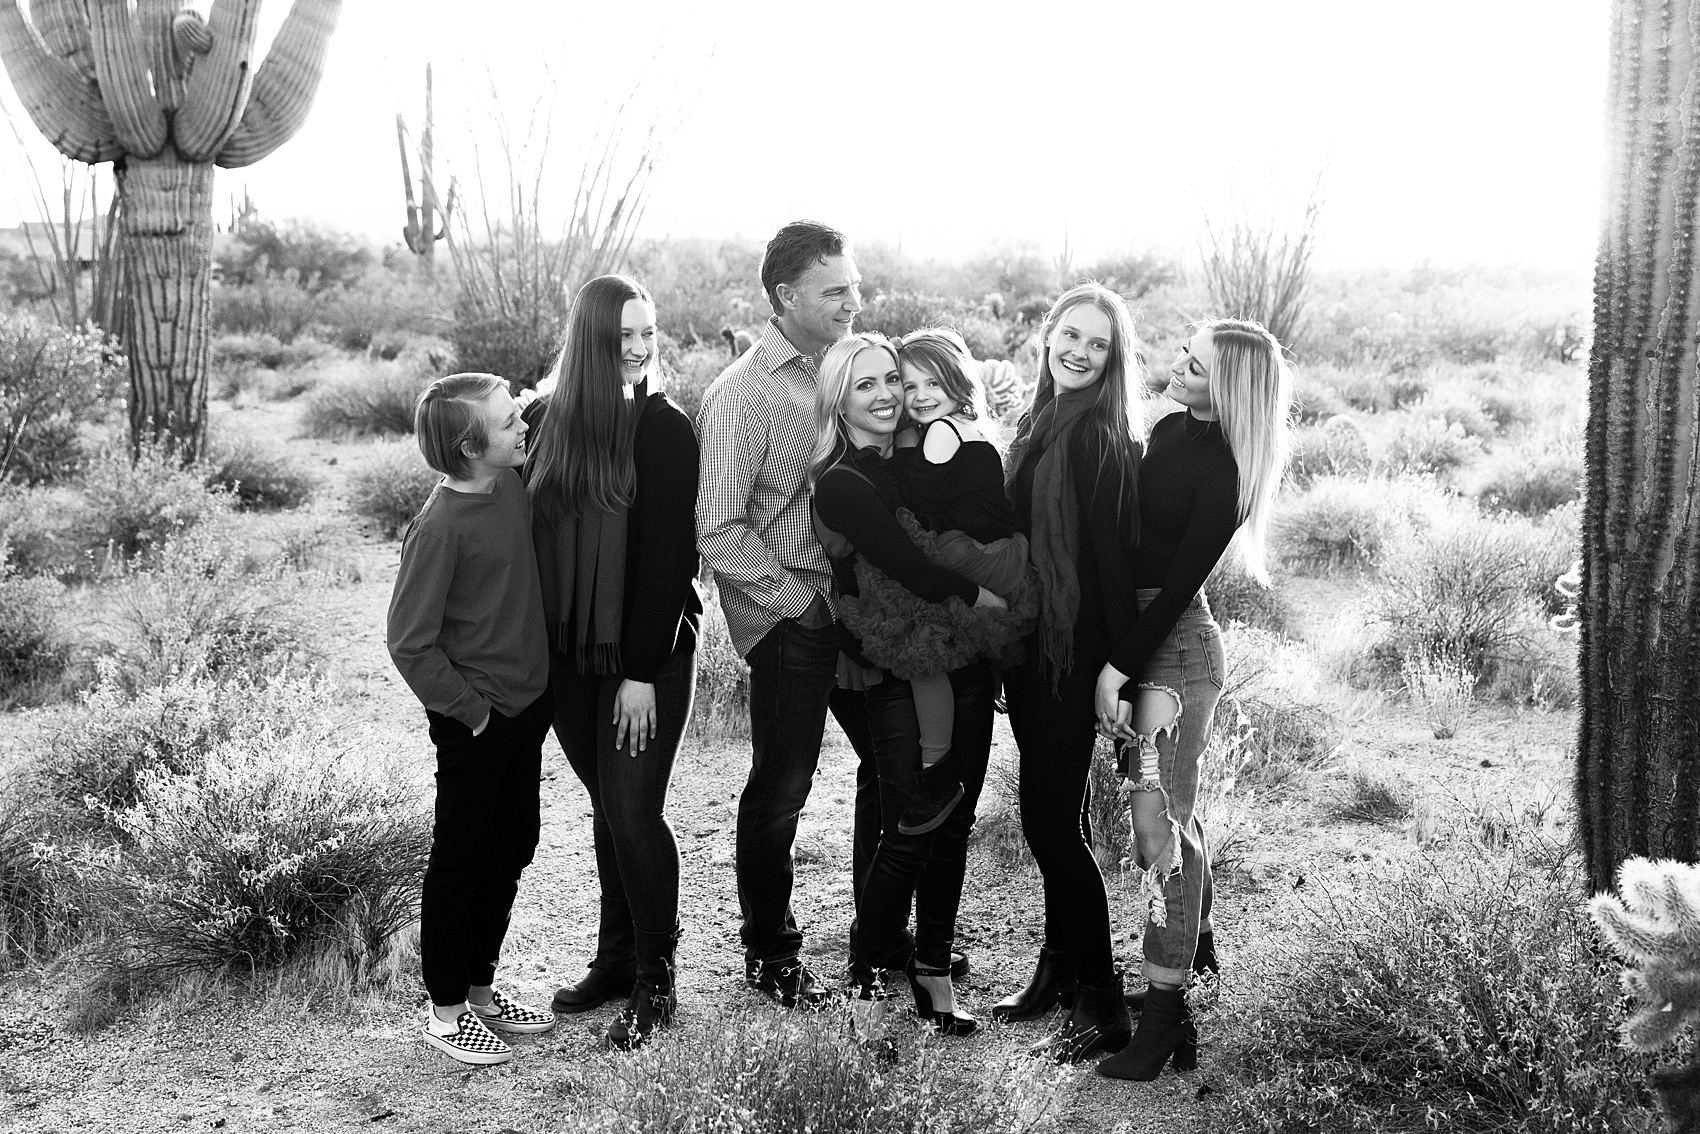 Leah Hope Photography | Scottsdale Phoenix Arizona | Desert Landscape Cactus Scenery | Sunset Golden Hour Family Photos | Family Pictures | Christmas Outfits | Family Poses